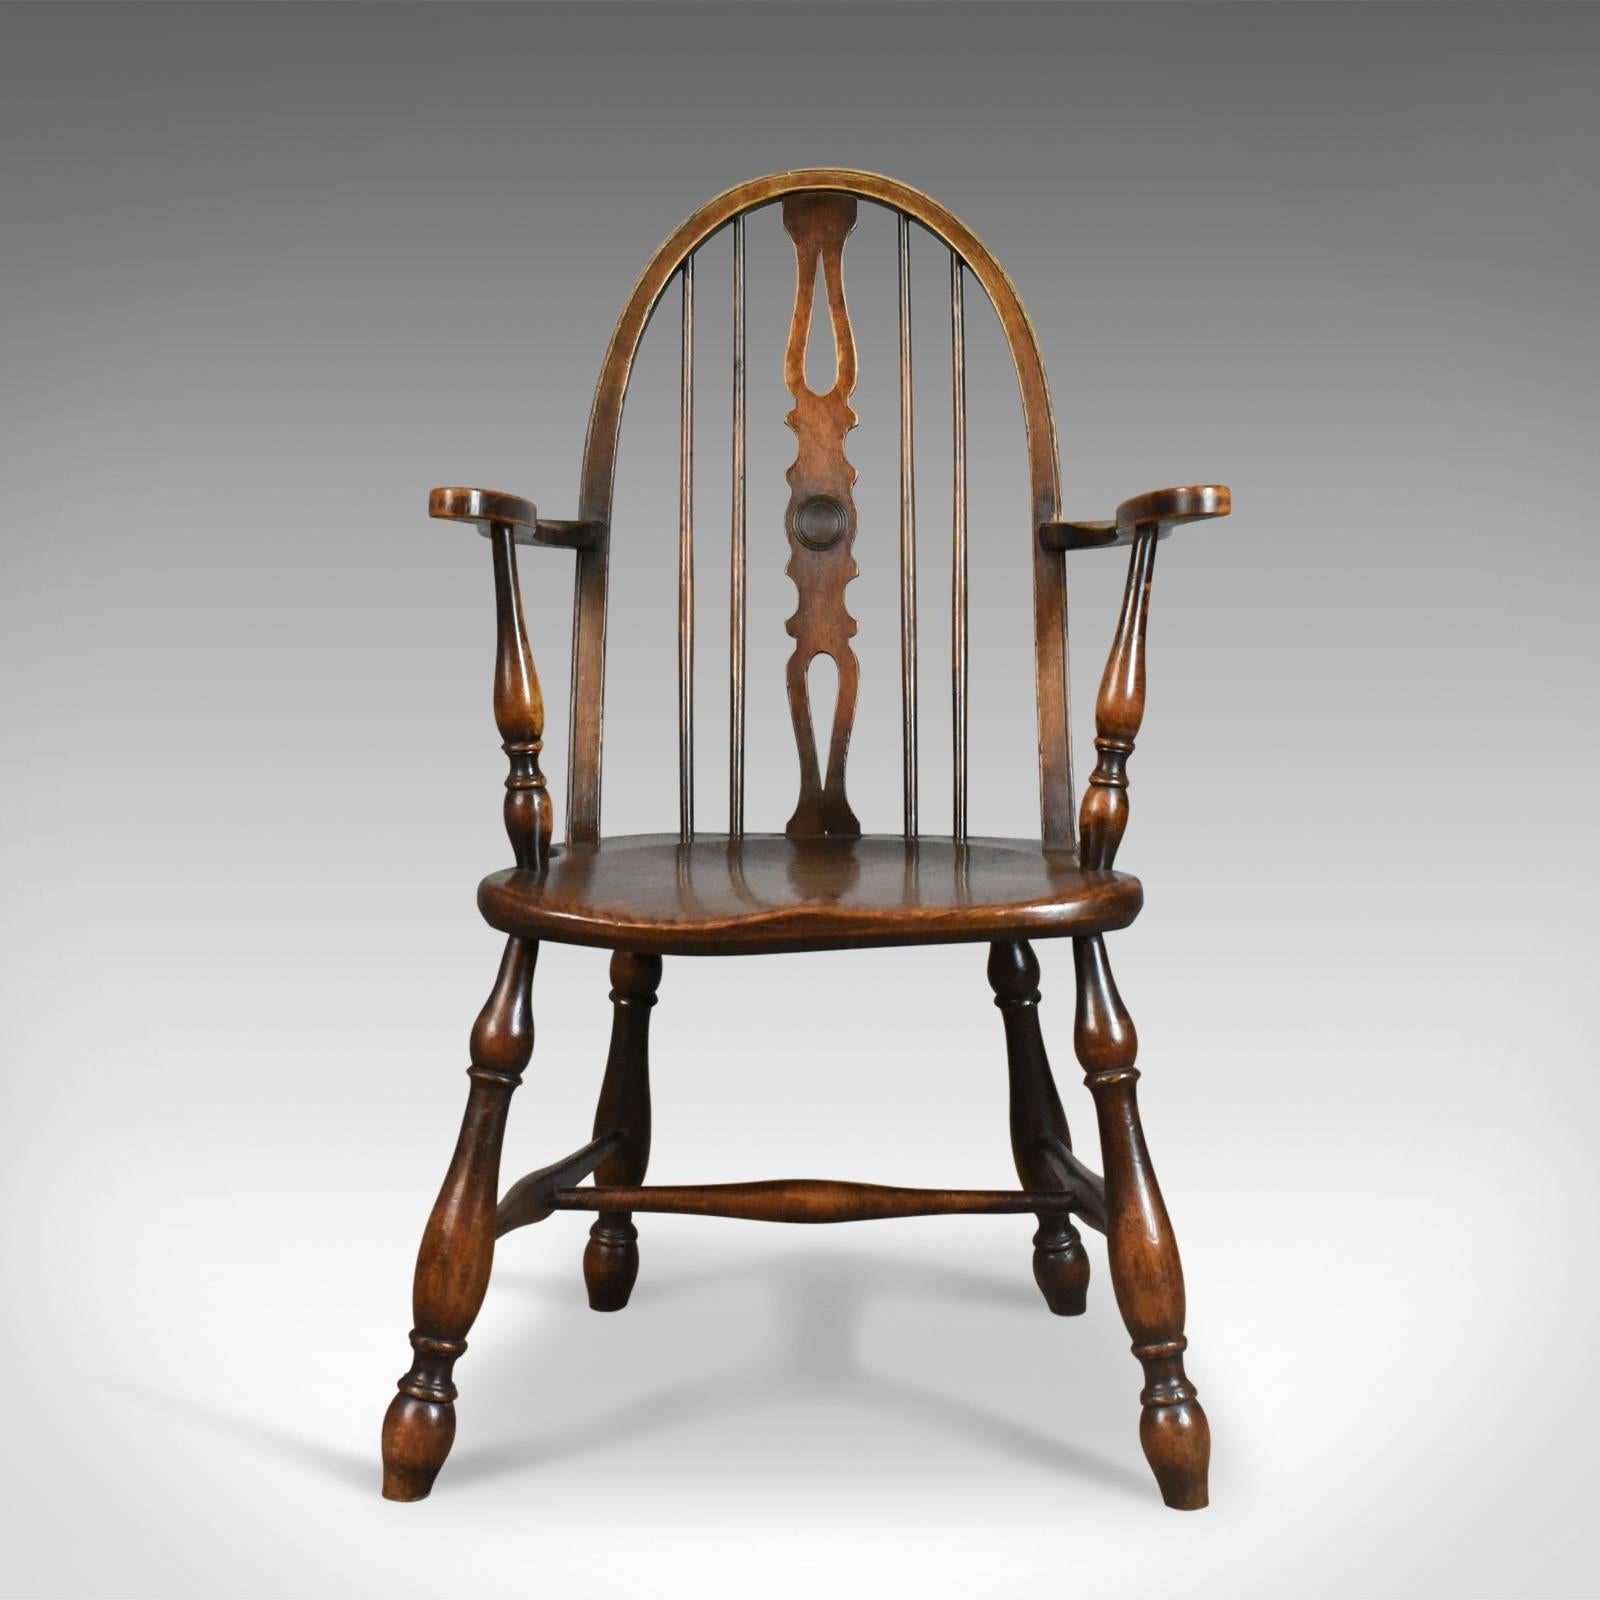 This is an antique elbow chair, an English, Victorian bow-back Windsor chair in beech and elm dating to circa 1890.

Appealing color and a desirable aged patina
Grain interest to the thick elm, saddle seat slab
Gothic overtones to the arched bow